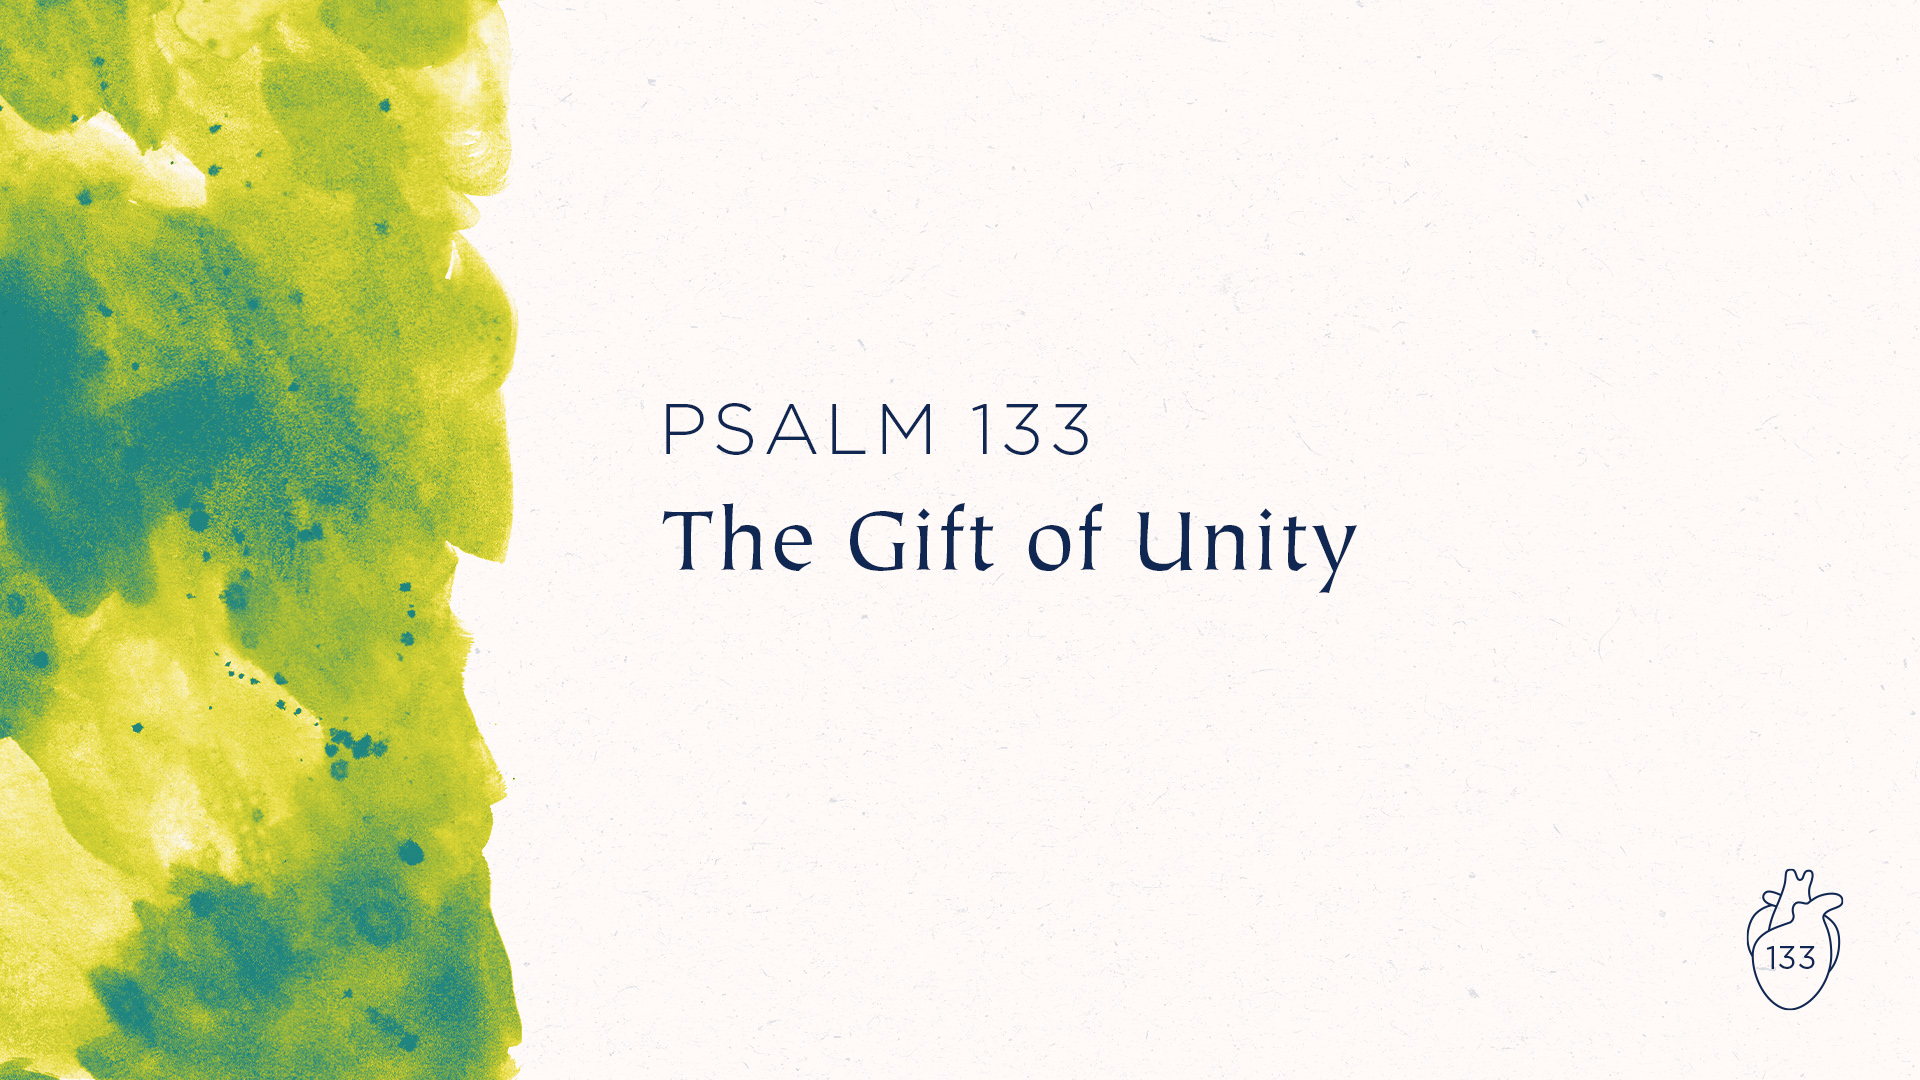 The Gift of Unity